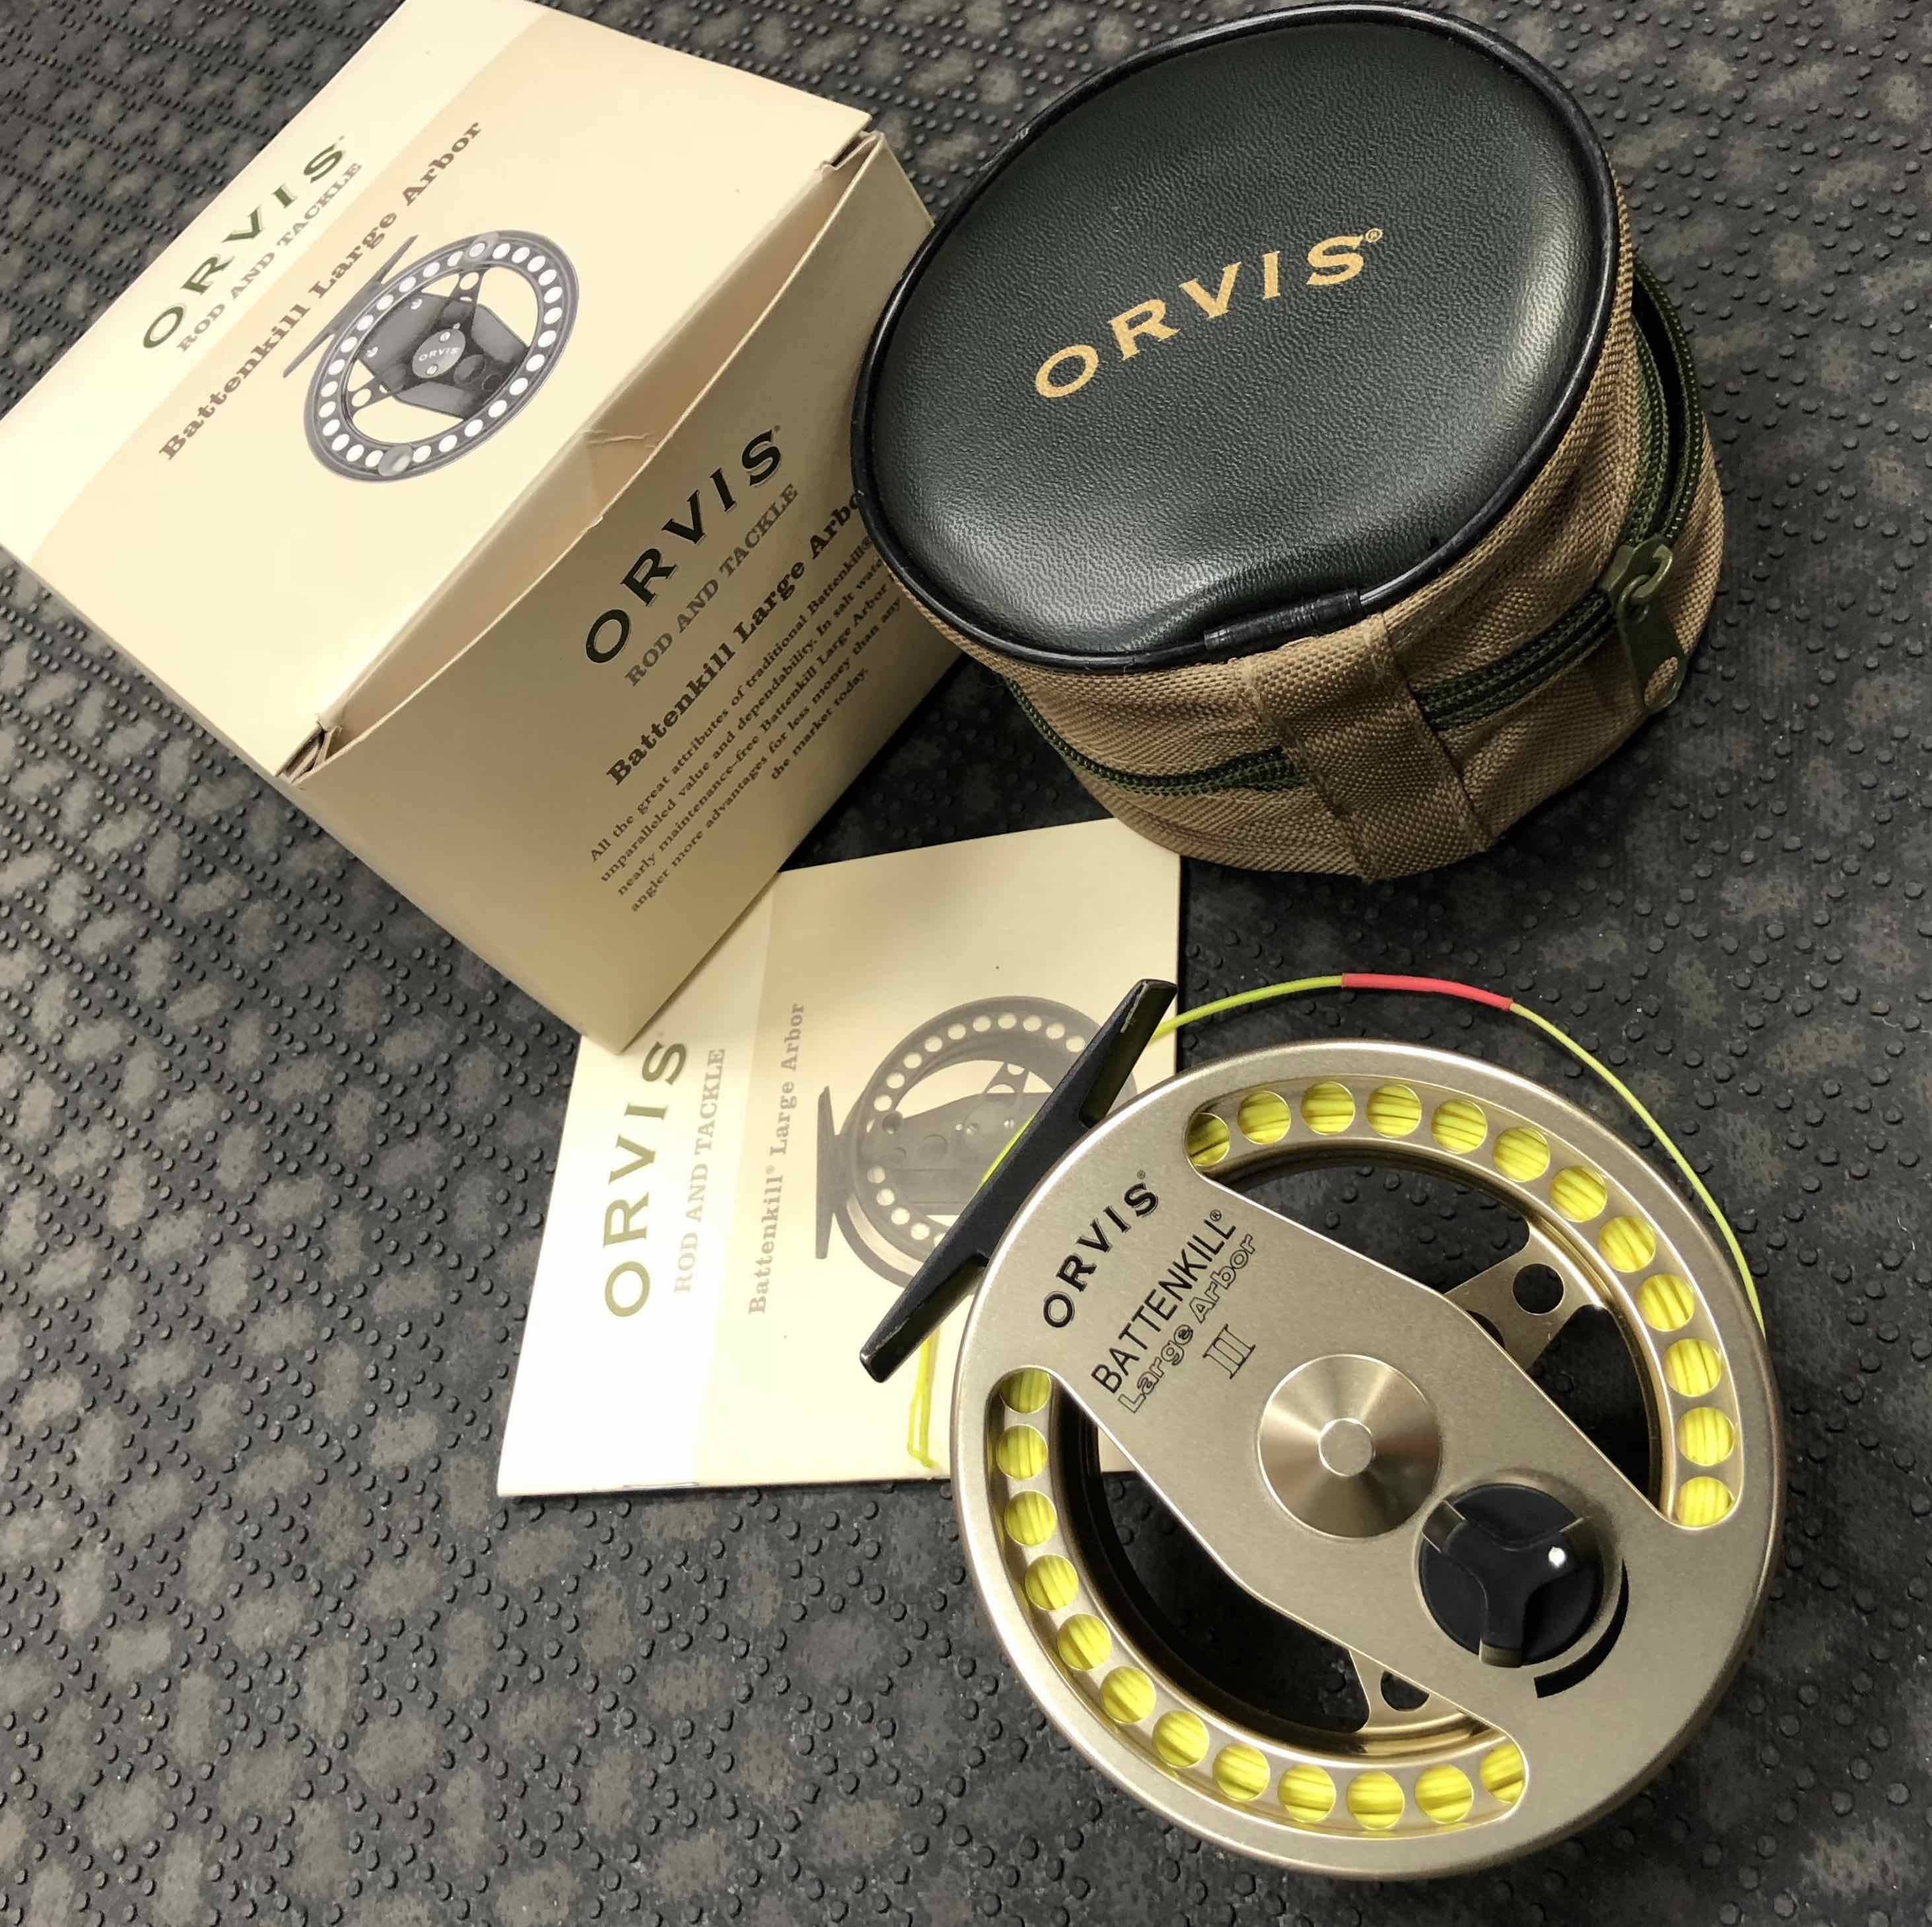 https://thefirstcast.ca/wp-content/uploads/2018/03/Orvis-Battenkill-Large-Arbour-II-Fly-Reel-Model-01-E1-61-cw-Cortland-333-WF5-Fly-Line-Original-Box-and-Pouch-AA.jpg